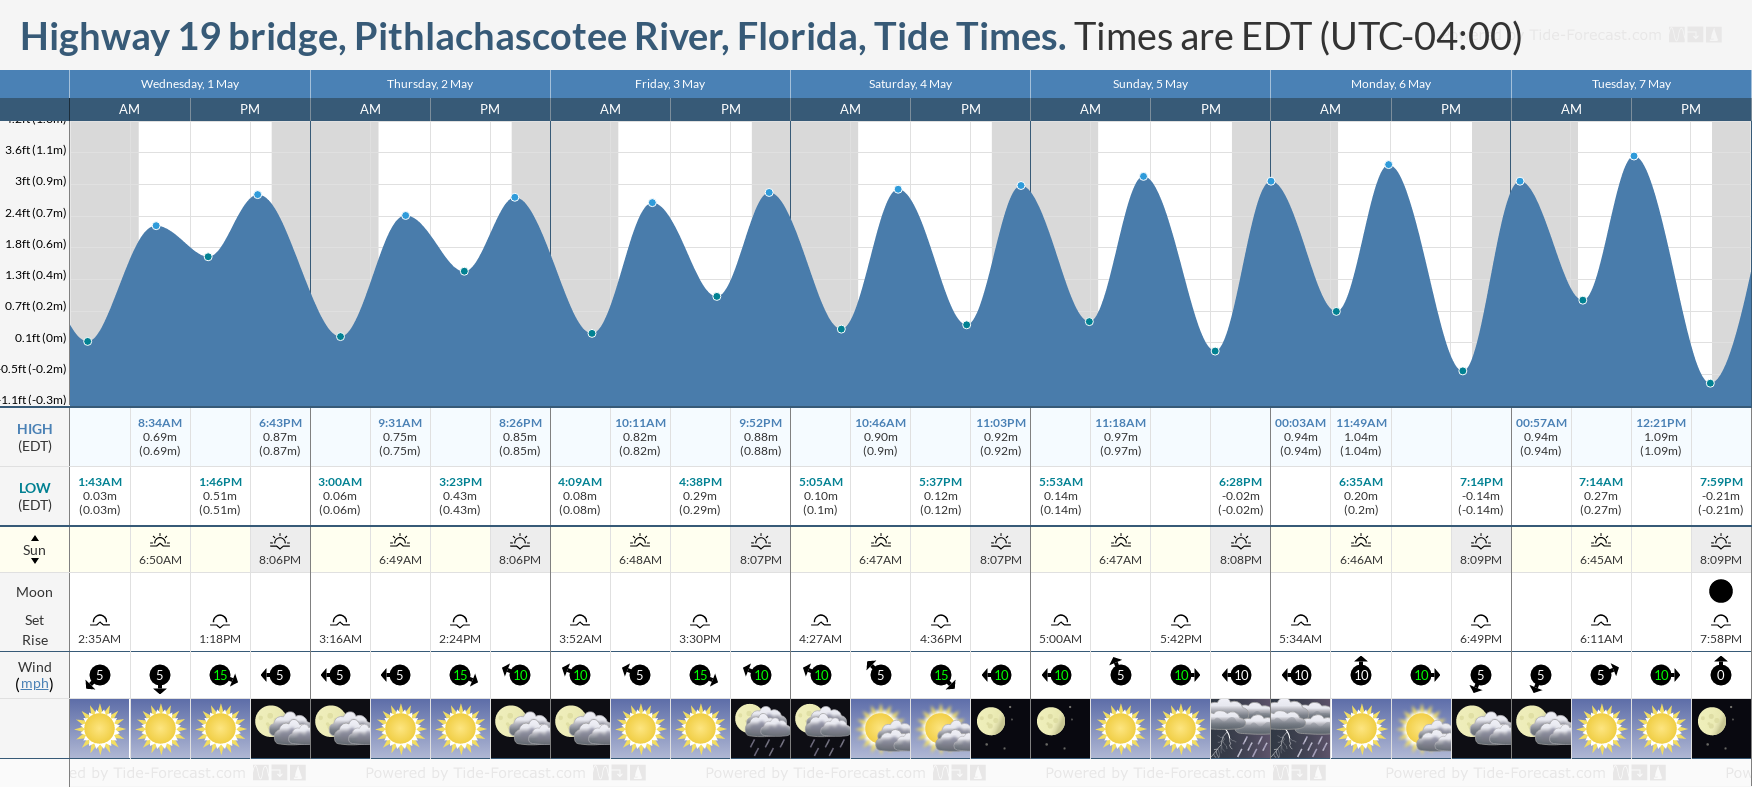 Highway 19 bridge, Pithlachascotee River, Florida Tide Chart including high and low tide tide times for the next 7 days